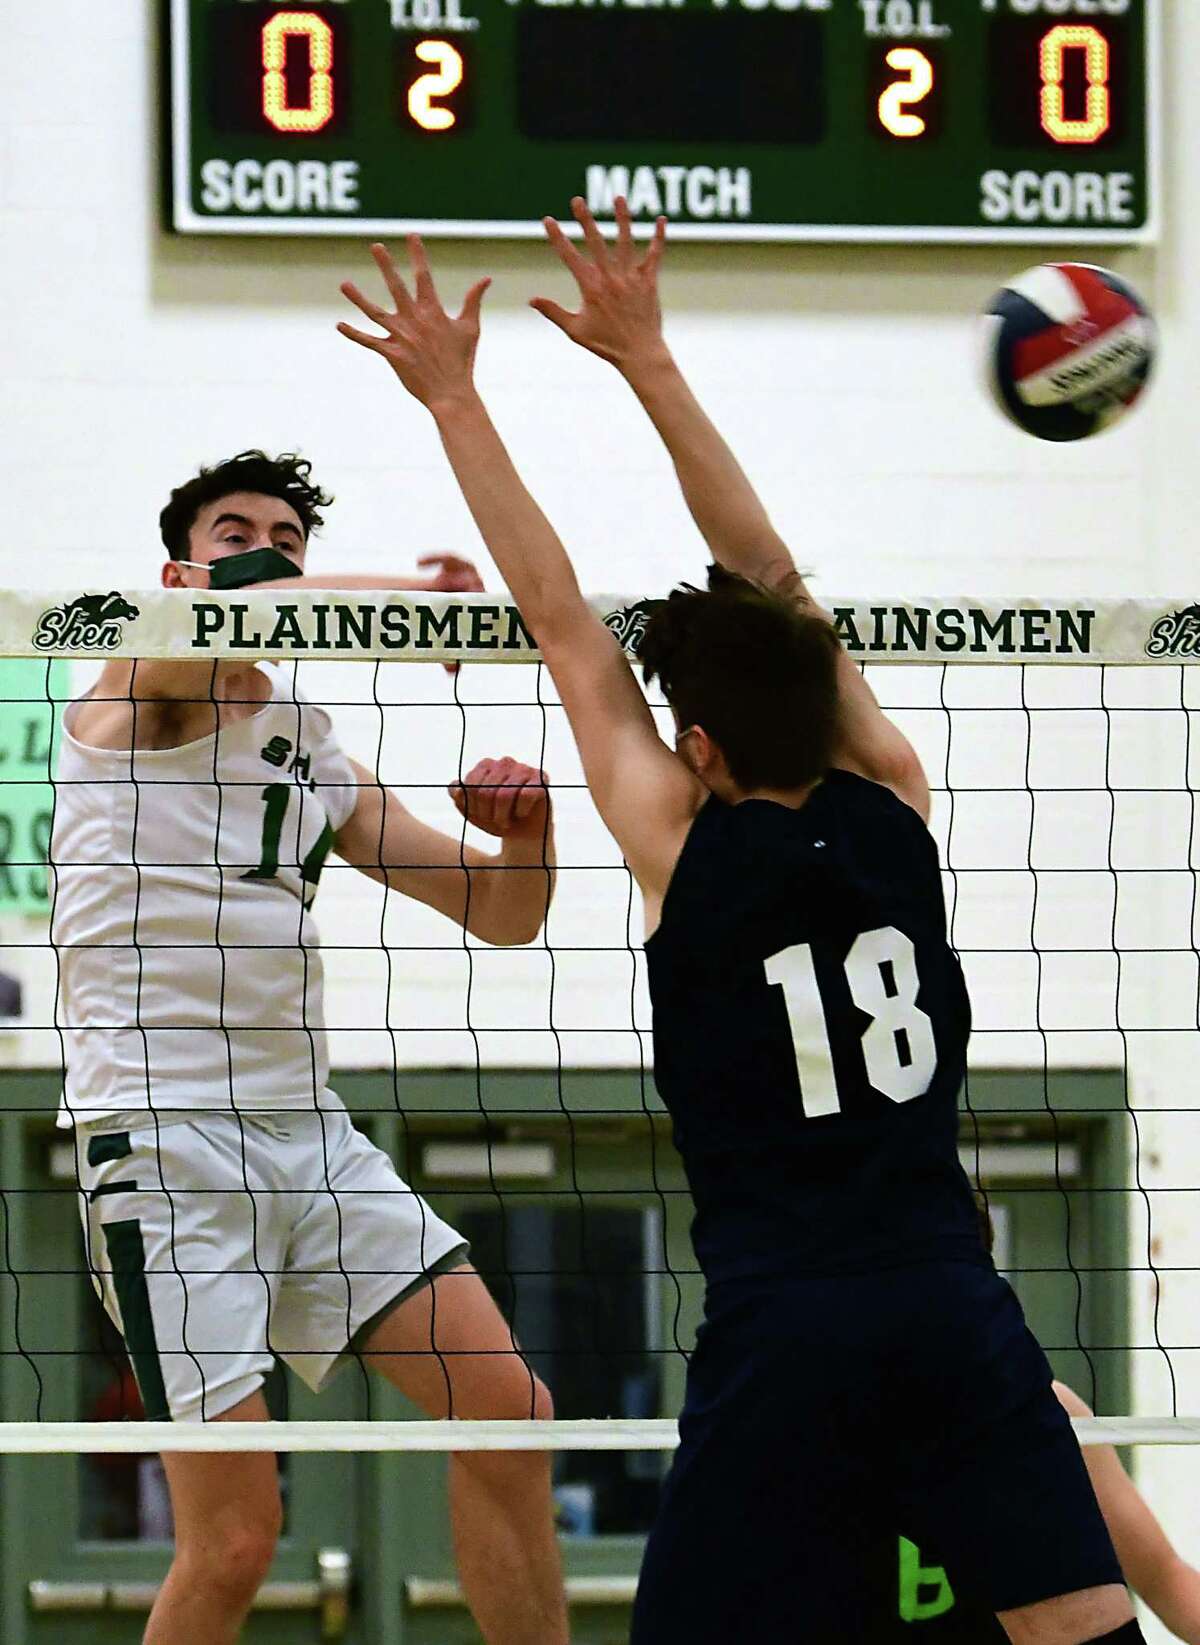 Shenendehowa’s Will Licata spikes the ball past Columbia’s Gabe Tucker during a volleyball game on Wednesday, April 28, 2021 in Clifton Park, N.Y. (Lori Van Buren/Times Union)